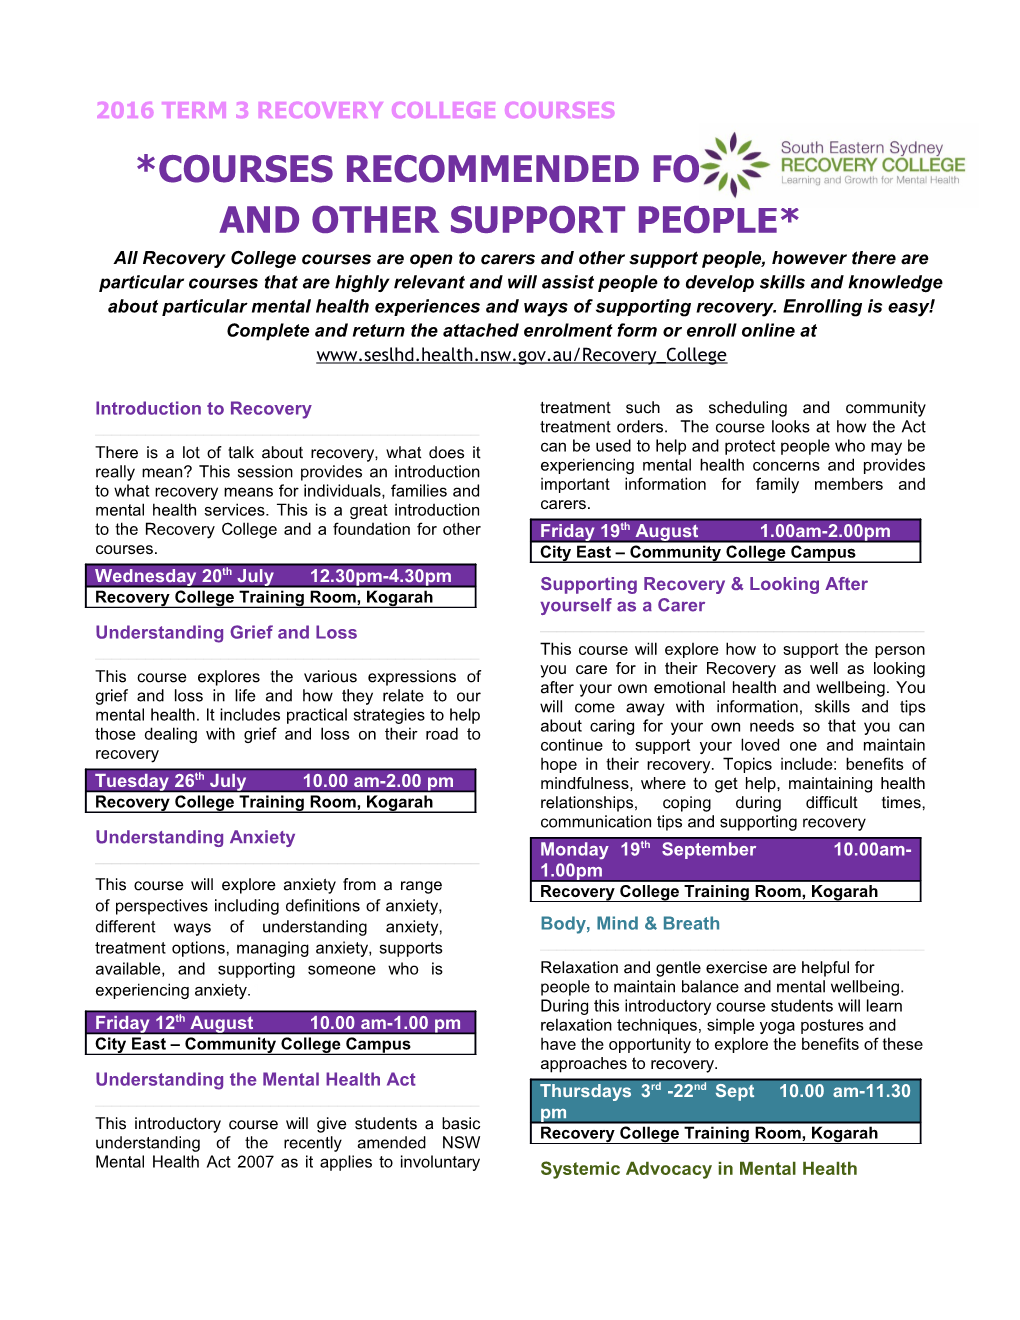 *Courses Recommended for Carers and Other Support People*